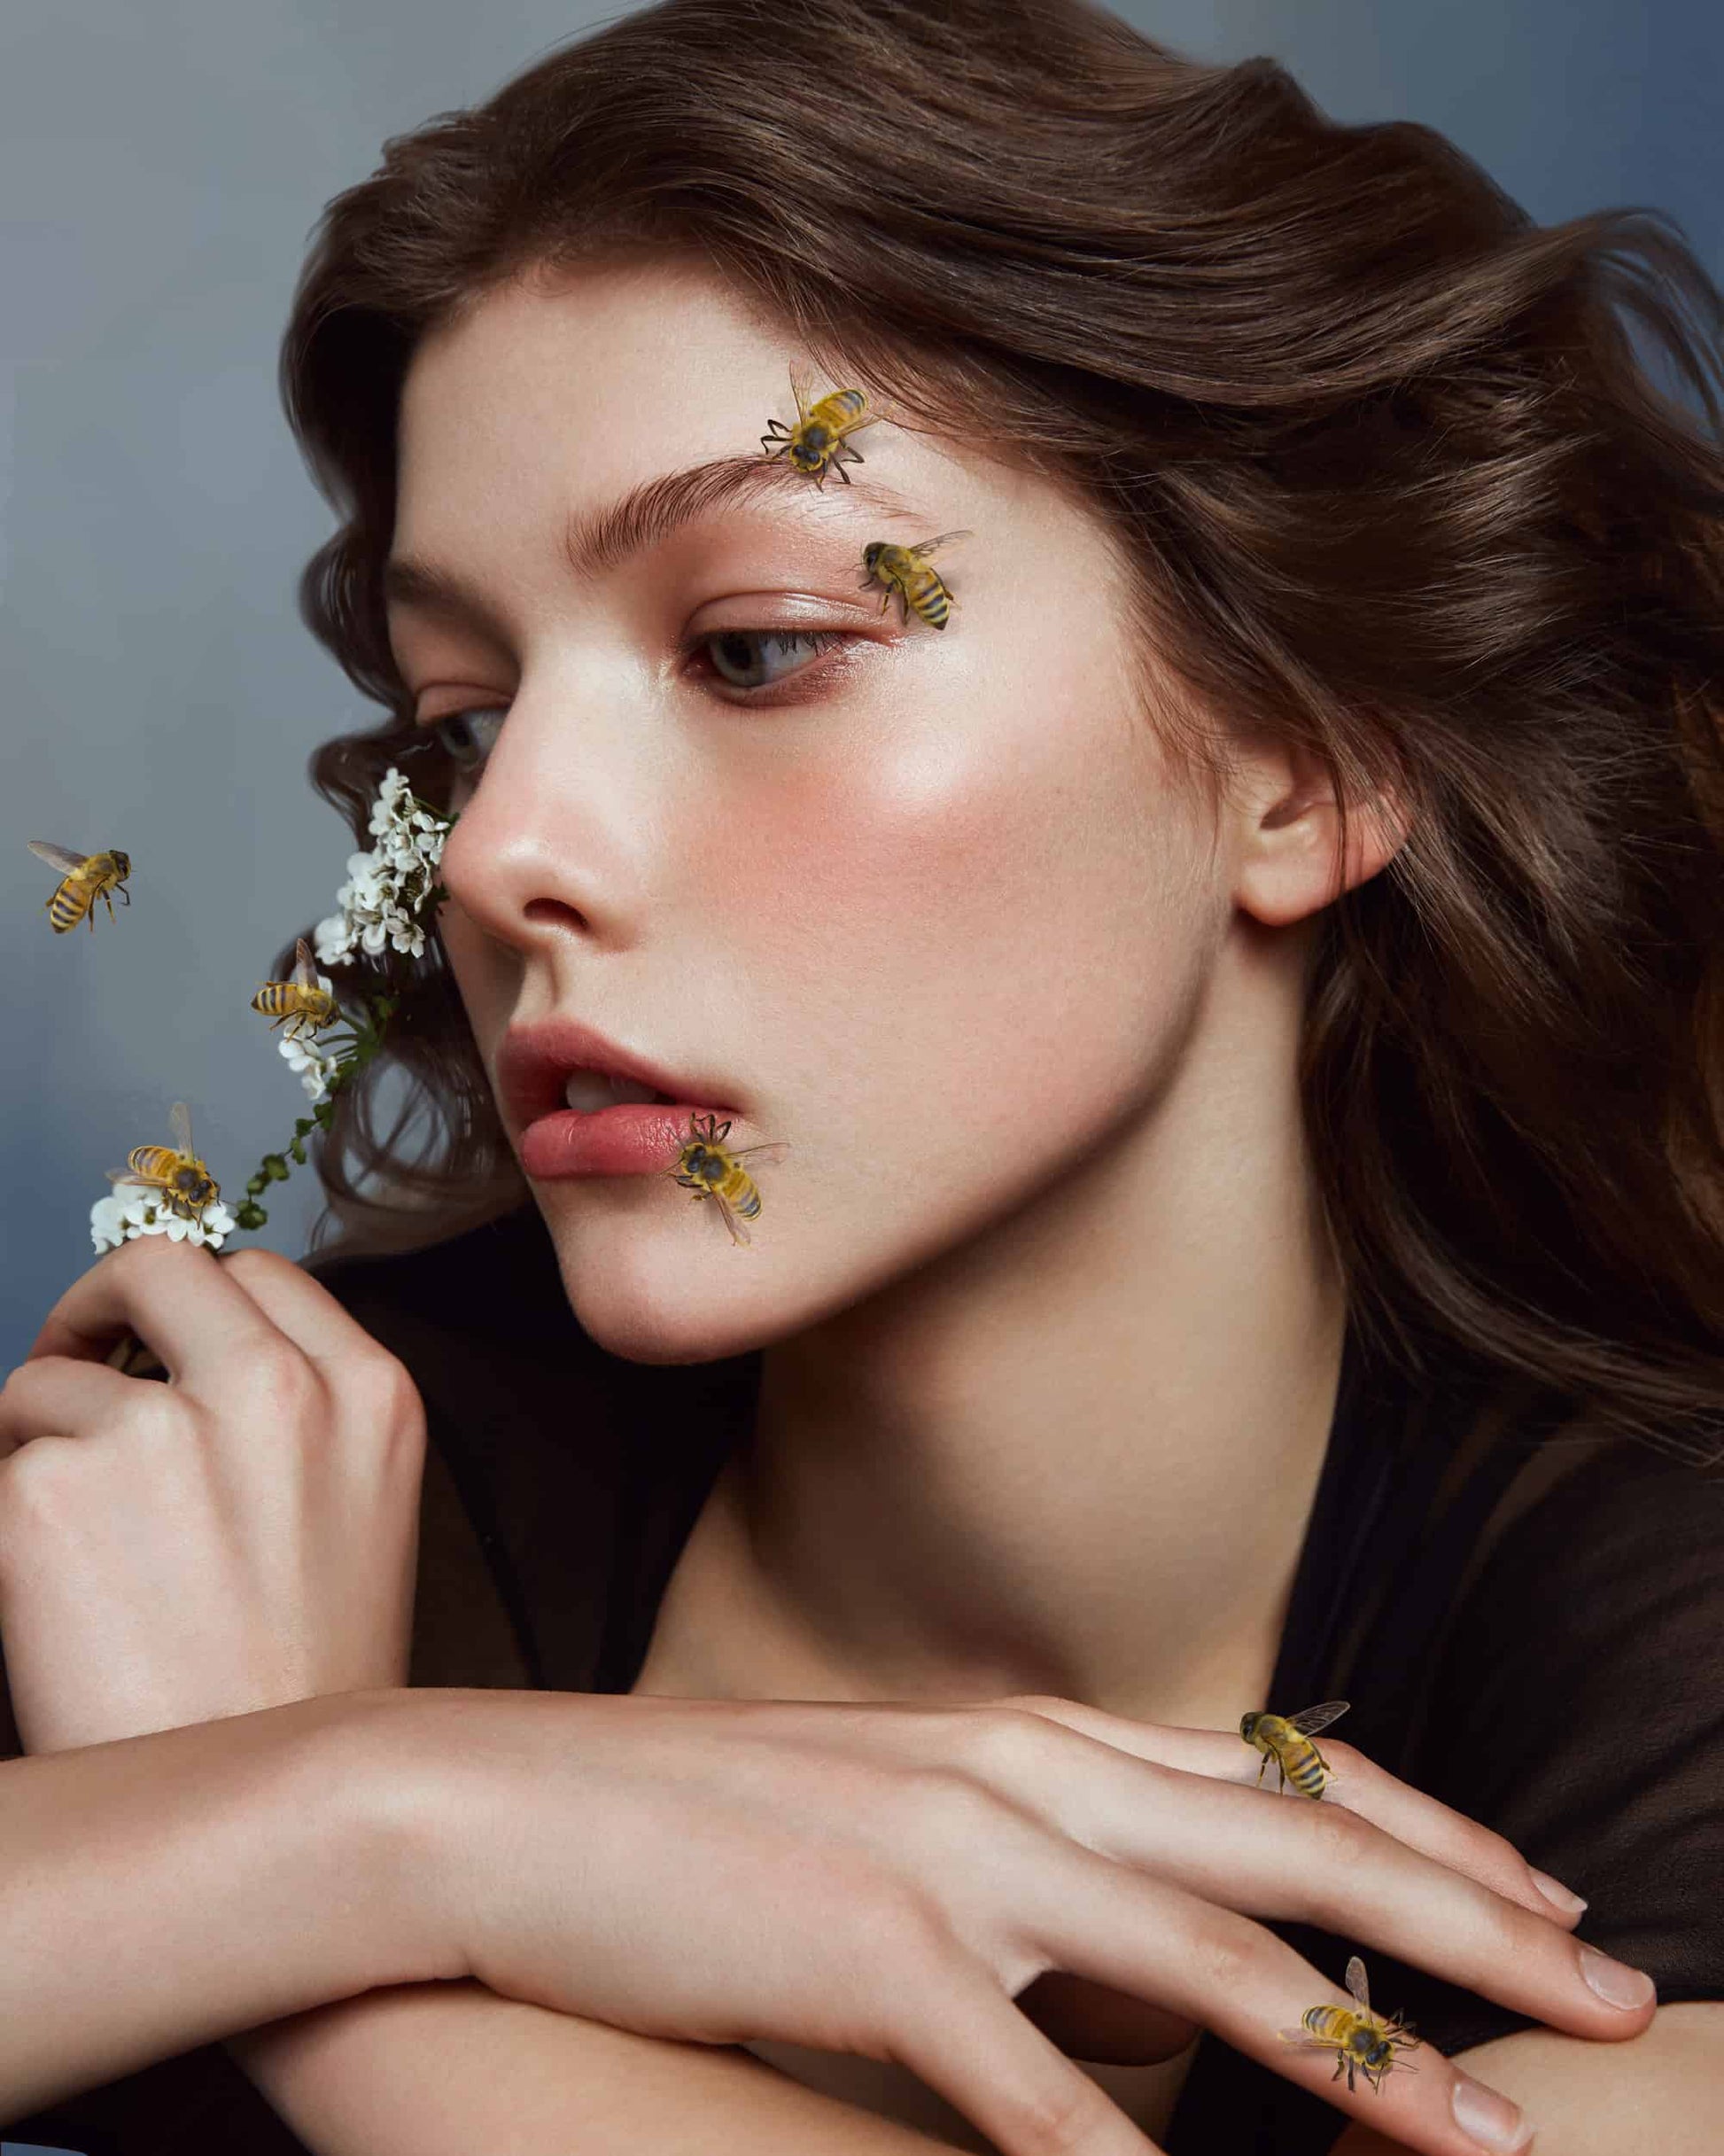 The artpiece 'Bee' by Yang Han from the series Blue Heart shows a brown haired woman, posing for a picture while there are bees, both flying around and sitting on her hands and face.